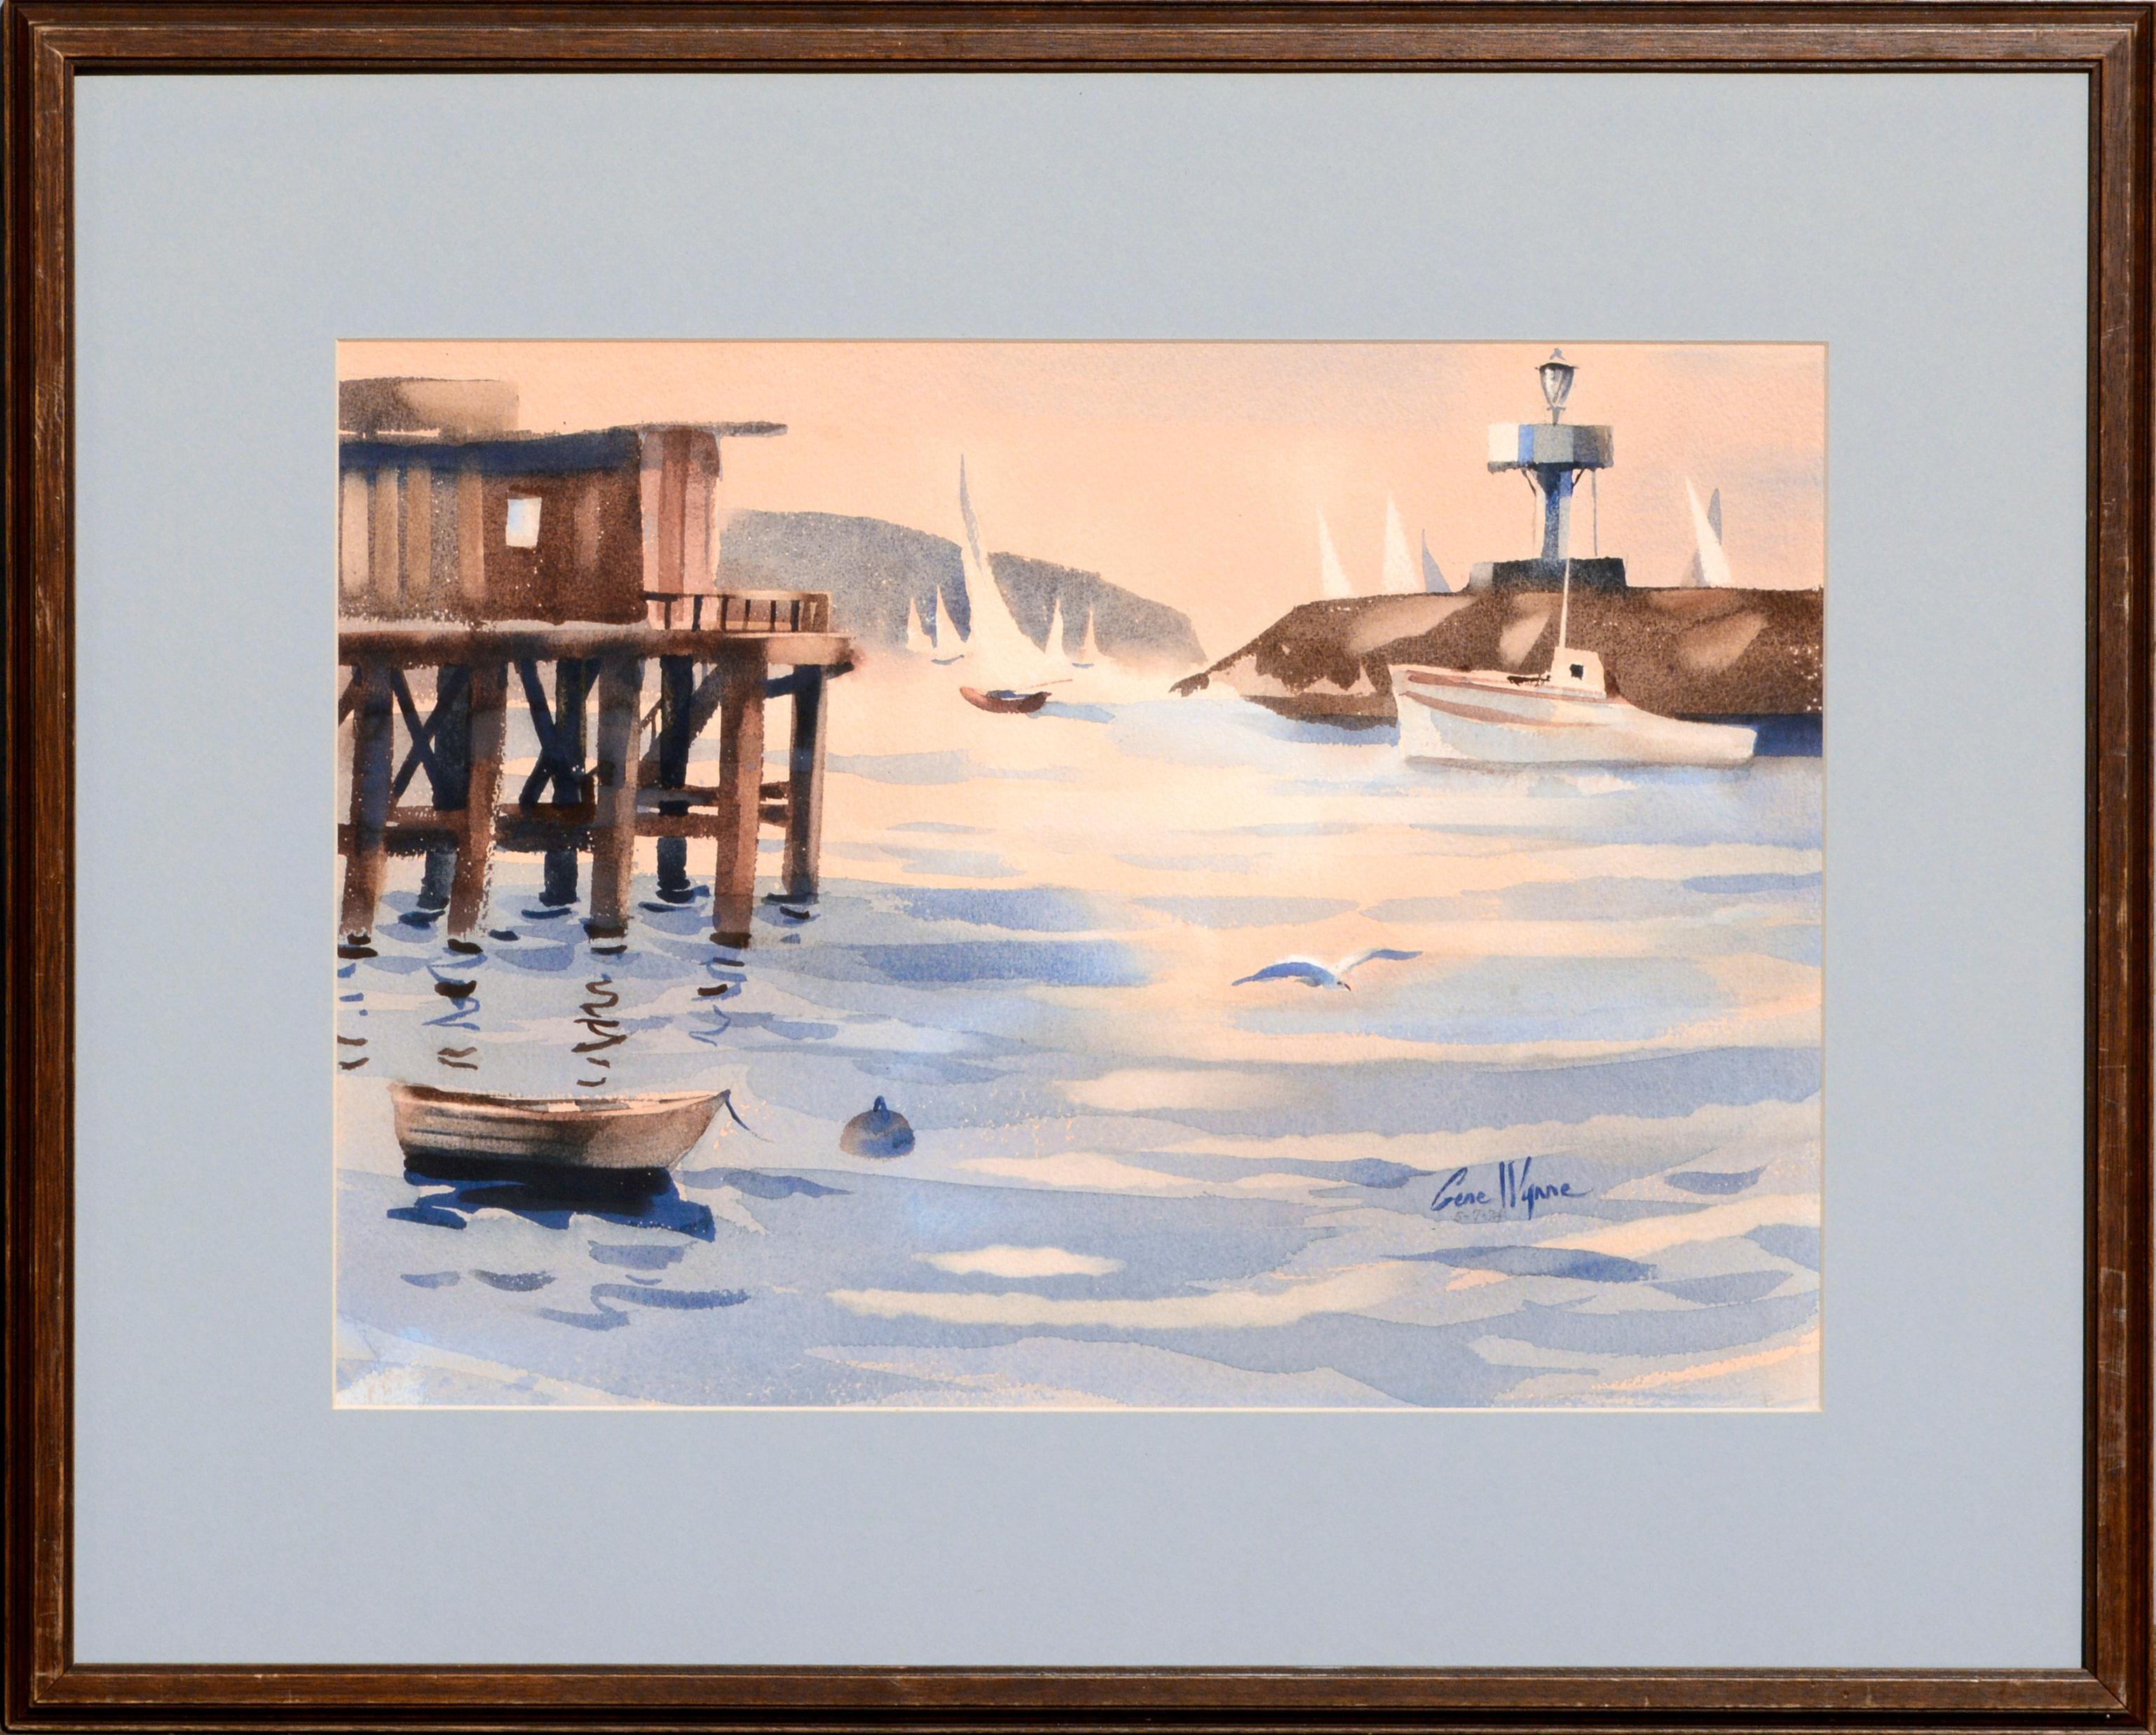 Gene Wynne Landscape Art - Pier and Sailboats in the Harbor - Seascape